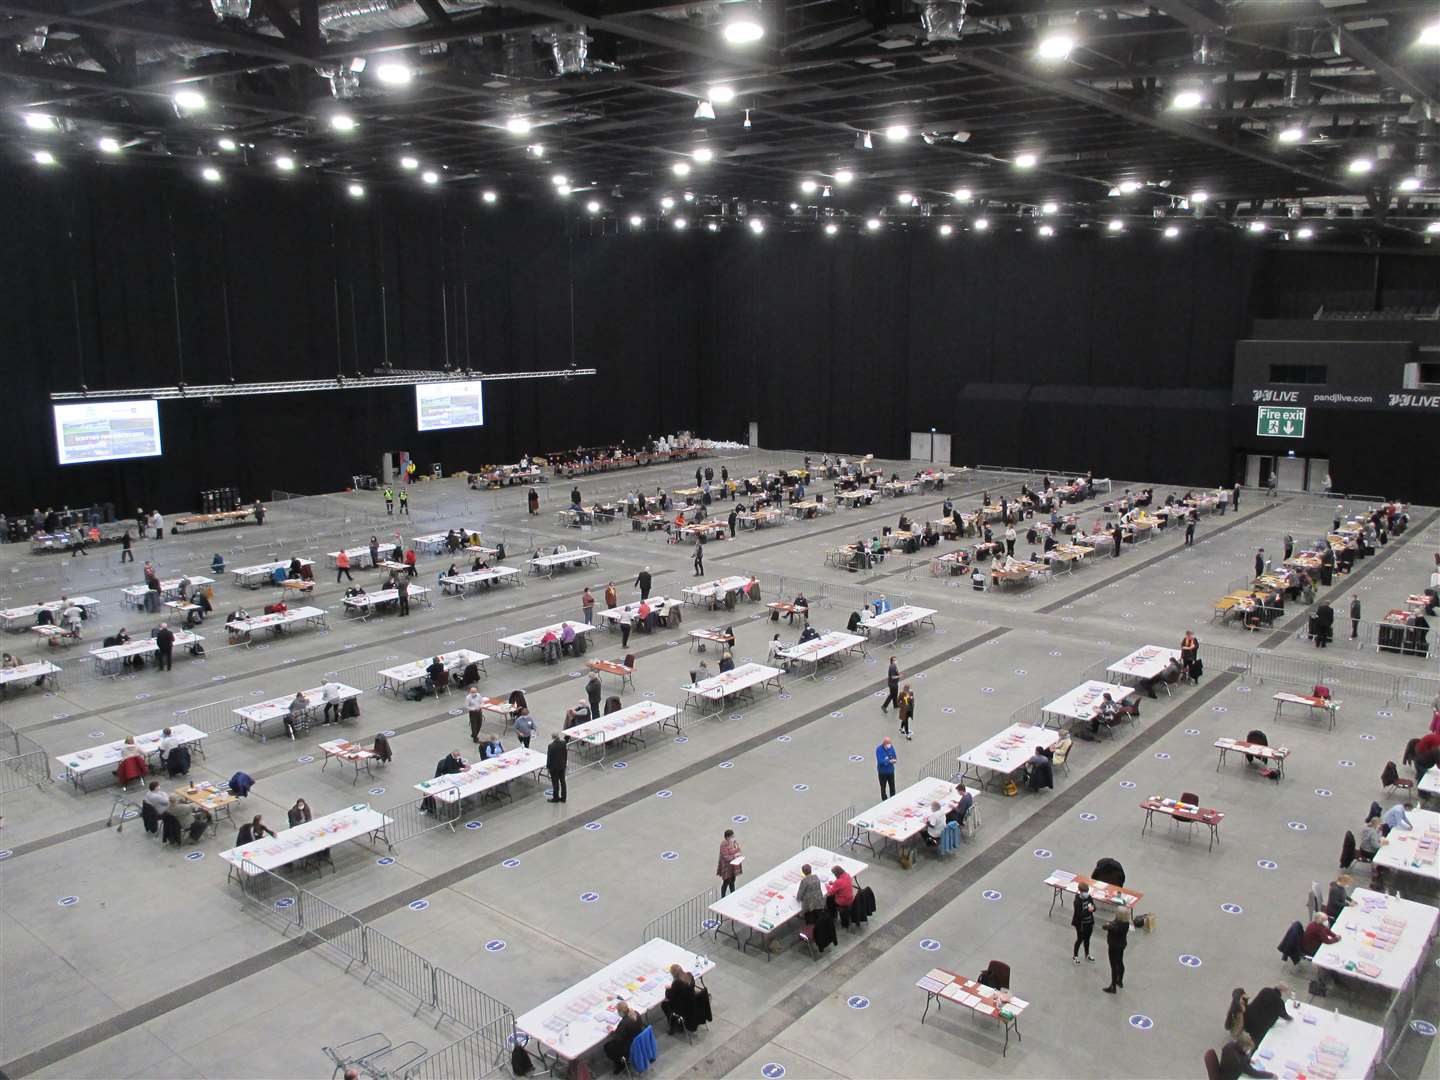 The second day of vote counting has started in Aberdeen.